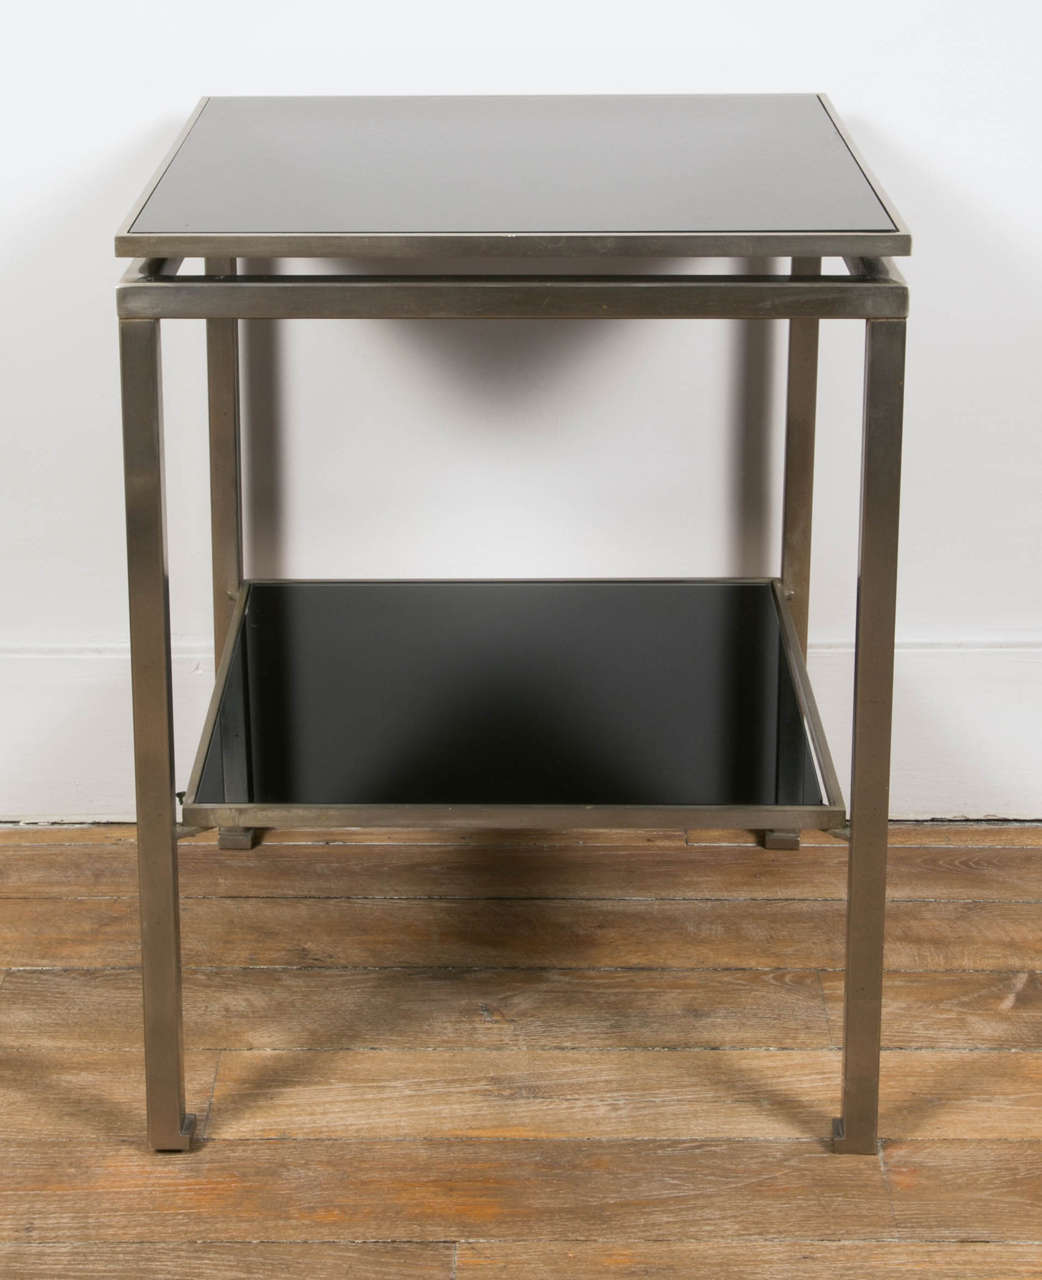 A pair of square two tiers tables , steel structure, black opaline tops. By Guy Lefevre.